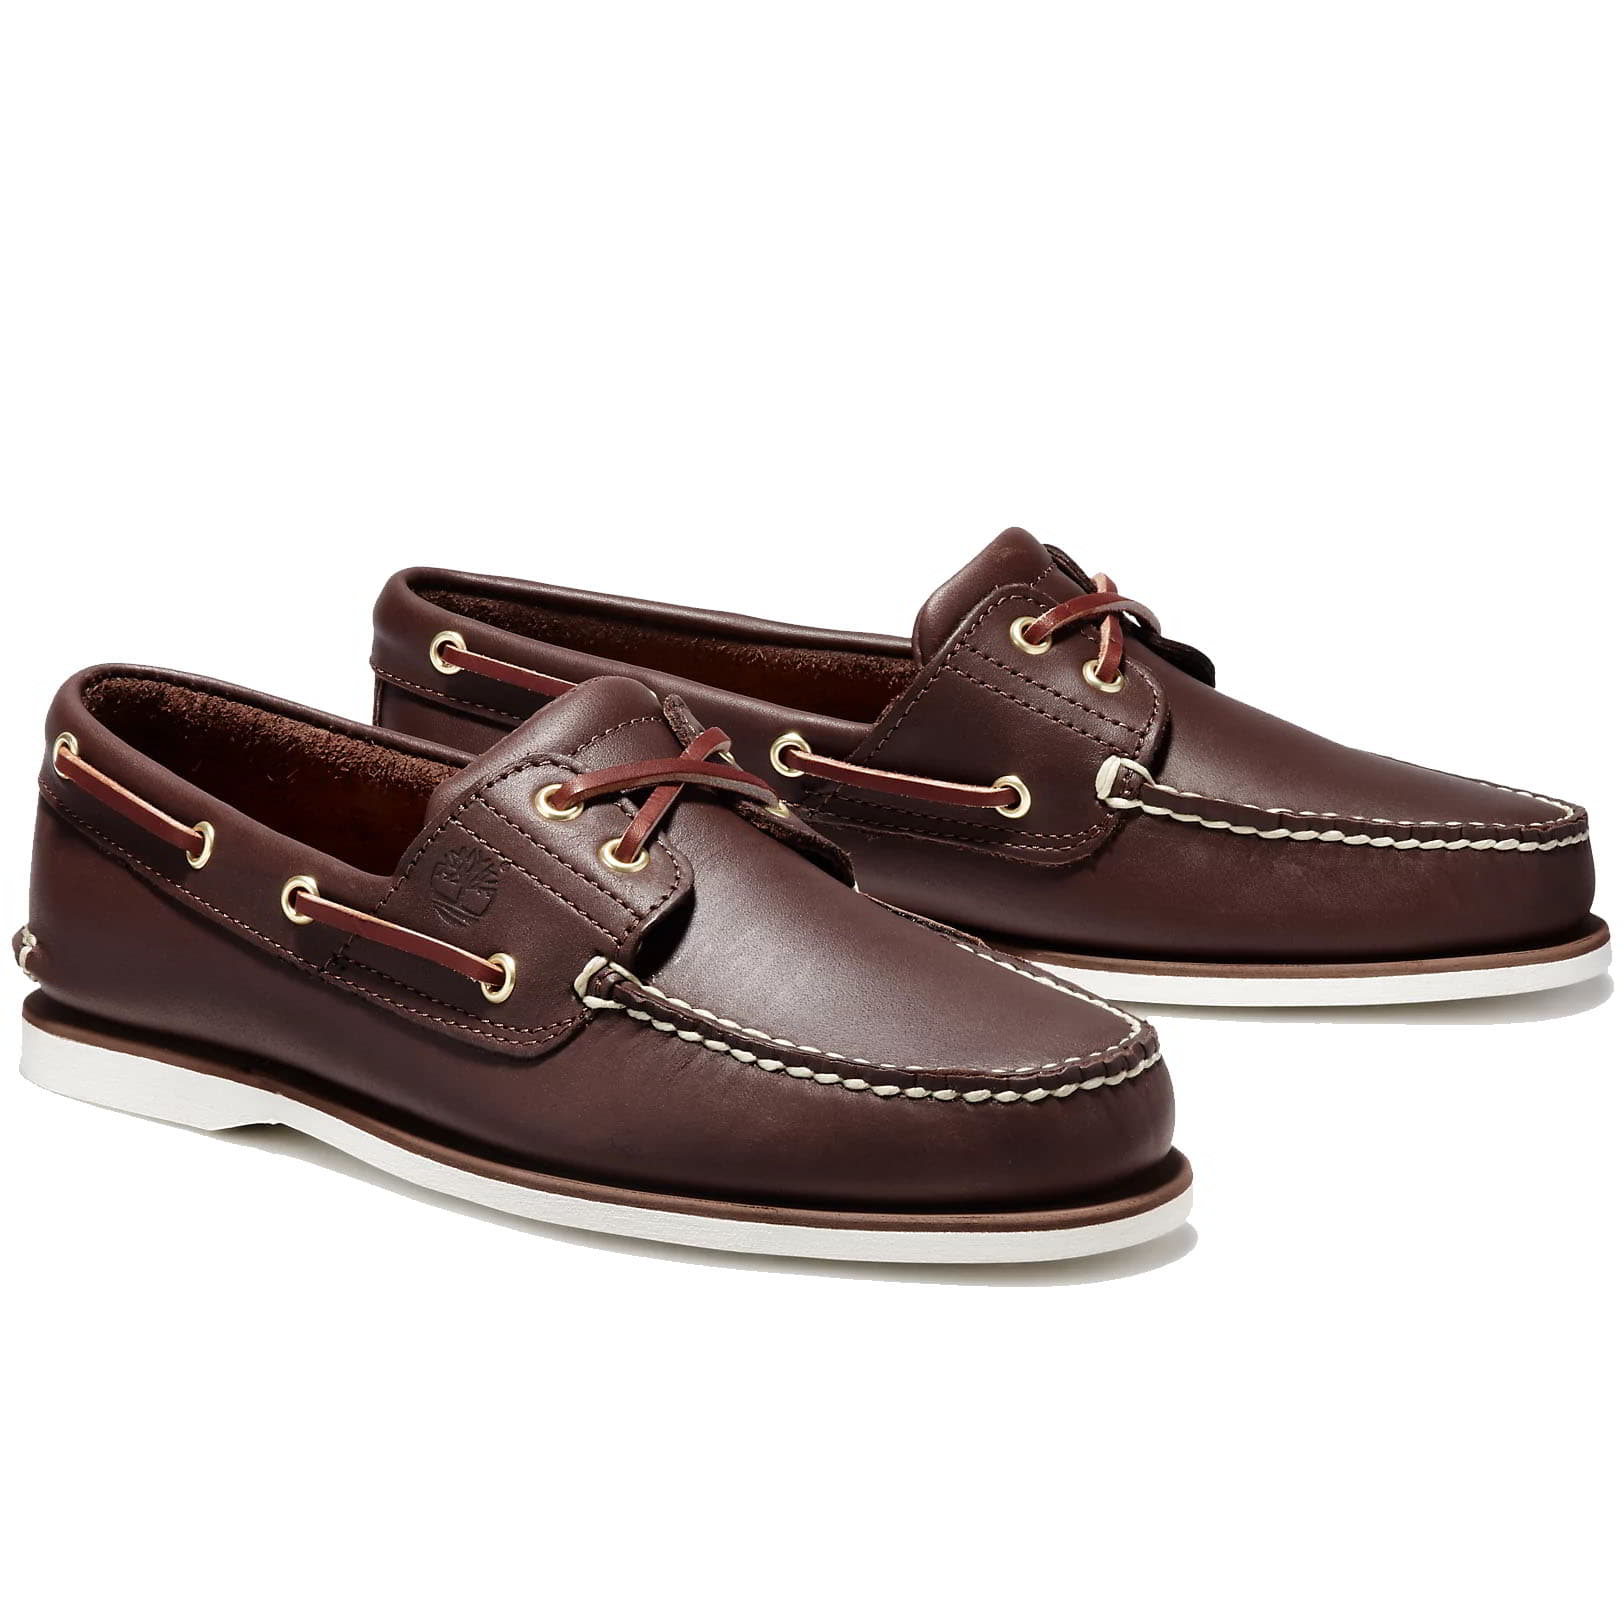 Timberland Men's Classic Boat Shoes - Dark Brown White - 74035